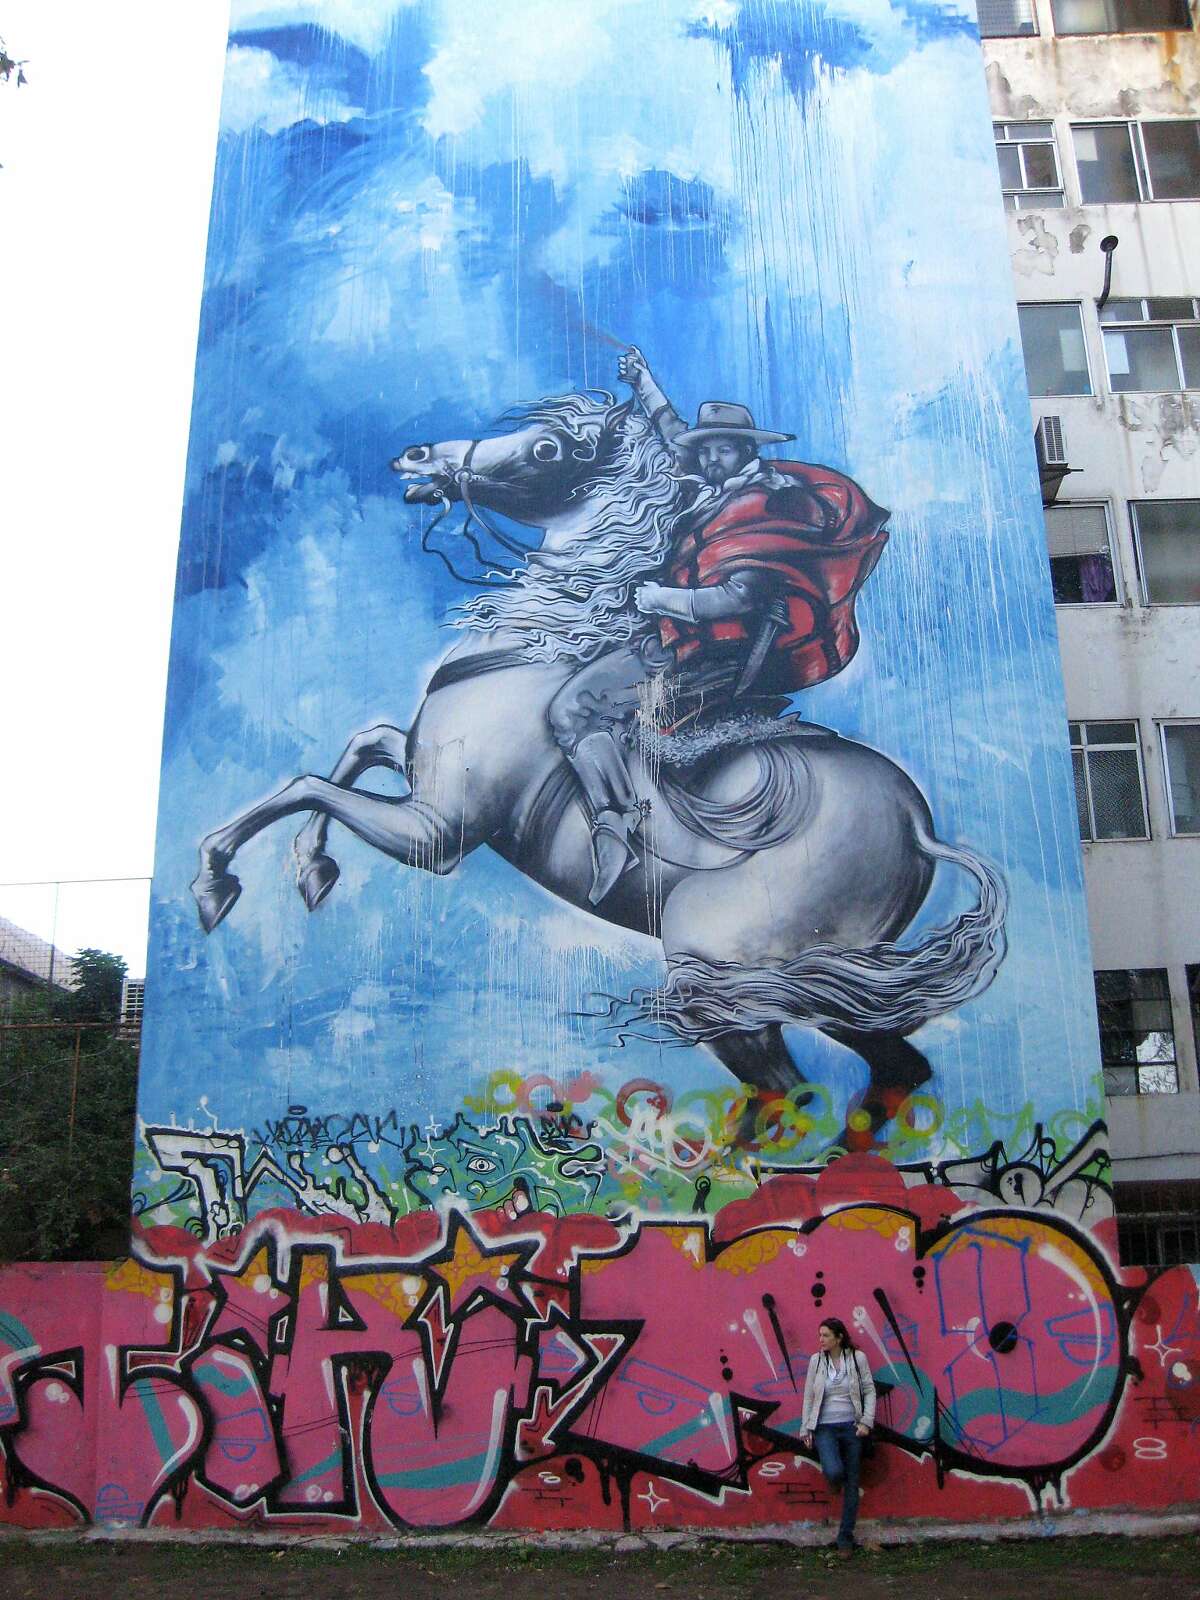 The burgeoning street art scene in the Palermo district of Buenos Aires has spawned related walking tours for visitors.